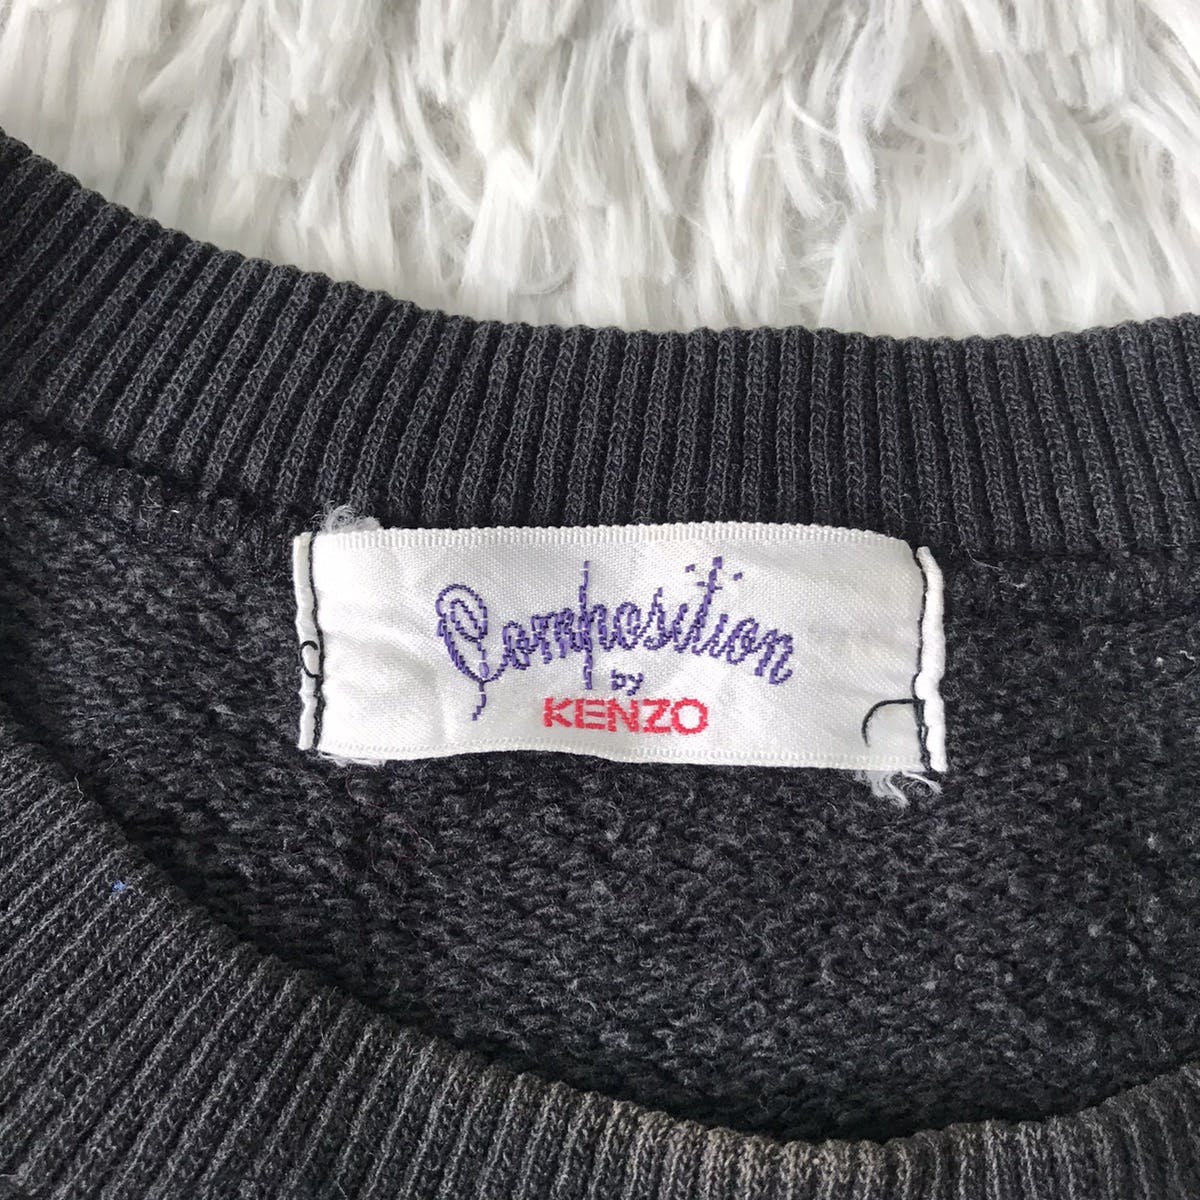 Composition By Kenzo Sweatshirt Made in Japan - 18